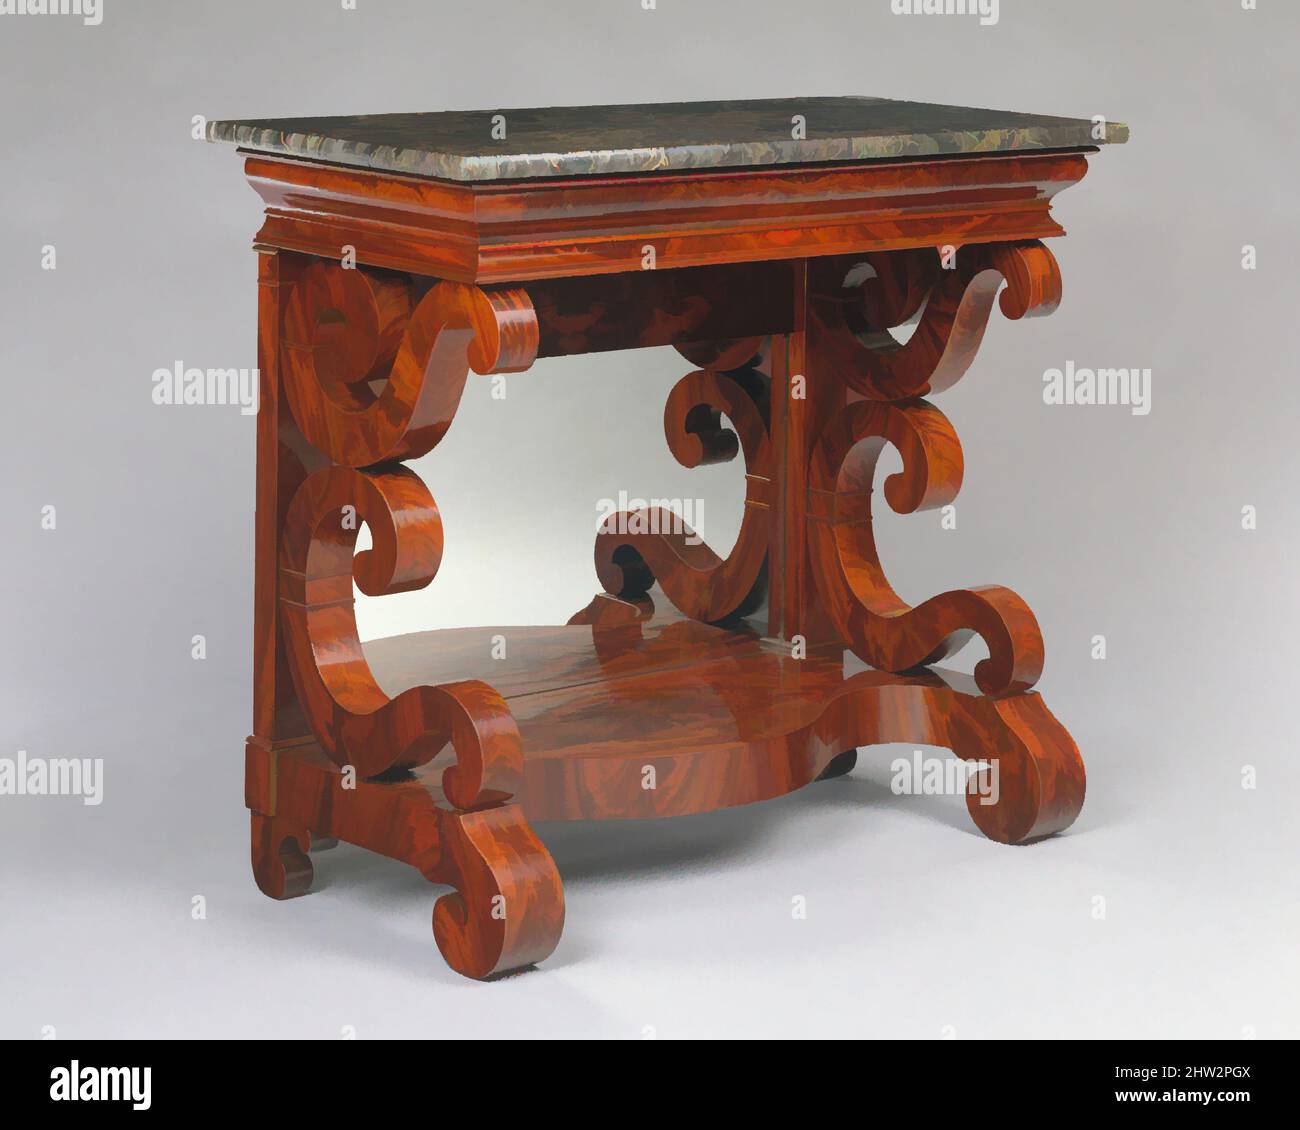 Art inspired by Pier Table, 1829–35, American, Mahogany veneer, mahogany, pine, ash, black marble and silvered glass, 37 x 43 x 20 1/8 in. (94 x 109.2 x 51.1 cm), Furniture, Joseph Meeks & Sons (American, New York, 1829–35), By the early 1830s, simpler Grecian-style furniture with rich, Classic works modernized by Artotop with a splash of modernity. Shapes, color and value, eye-catching visual impact on art. Emotions through freedom of artworks in a contemporary way. A timeless message pursuing a wildly creative new direction. Artists turning to the digital medium and creating the Artotop NFT Stock Photo